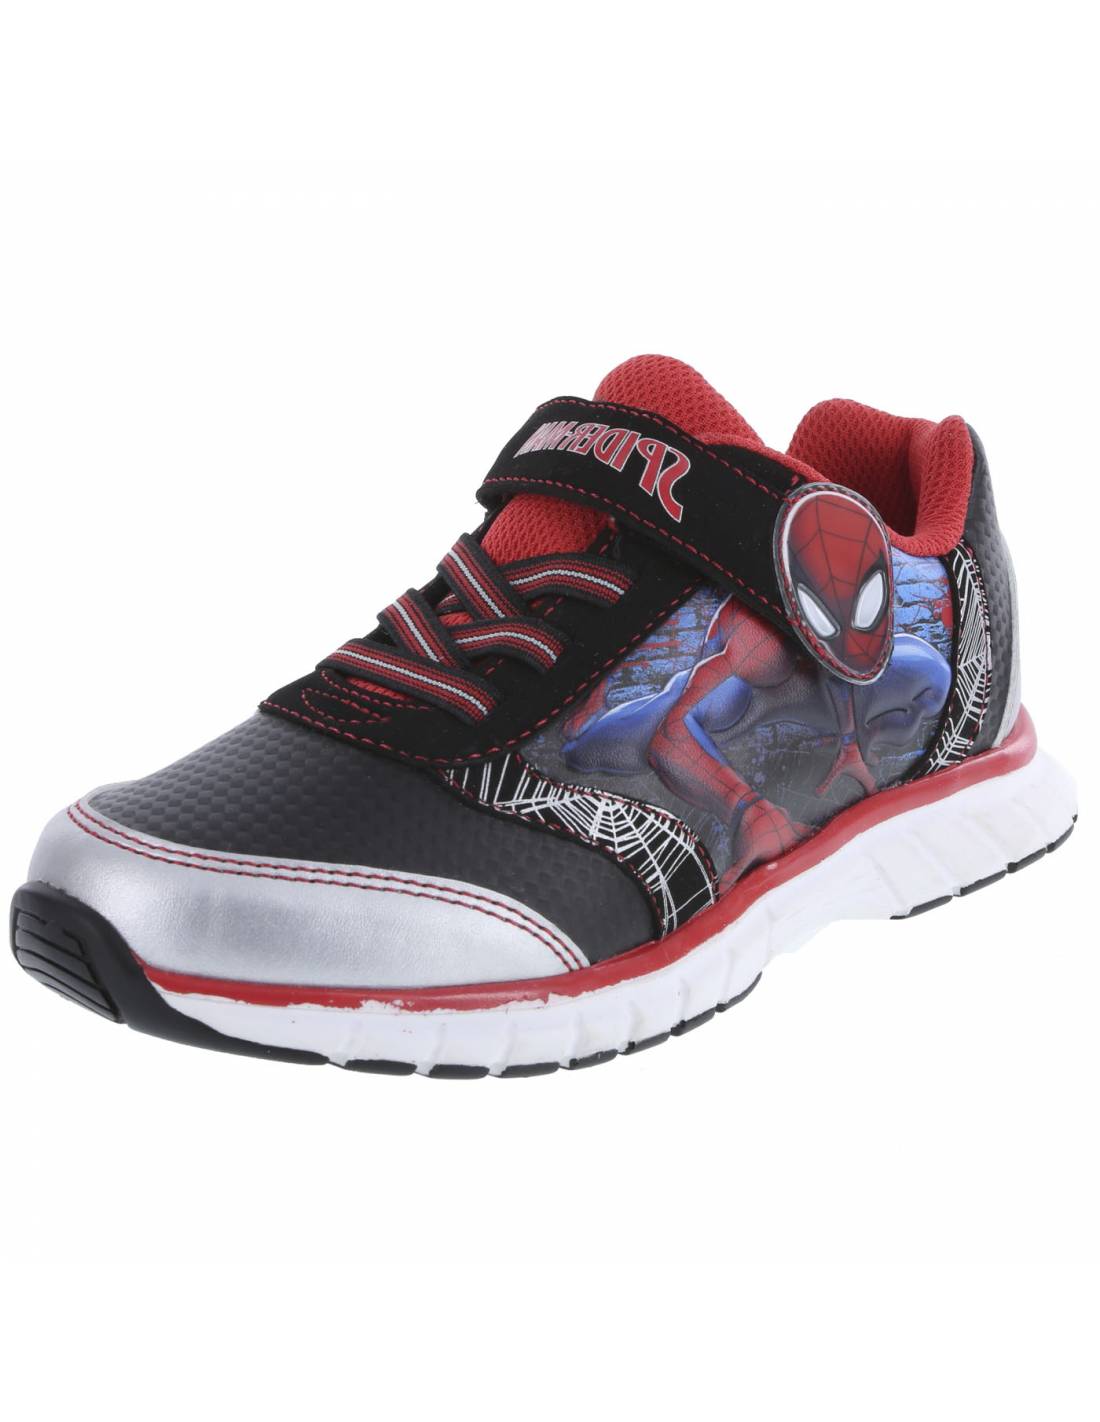 Boy's Spiderman Strap Sneakers | Payless